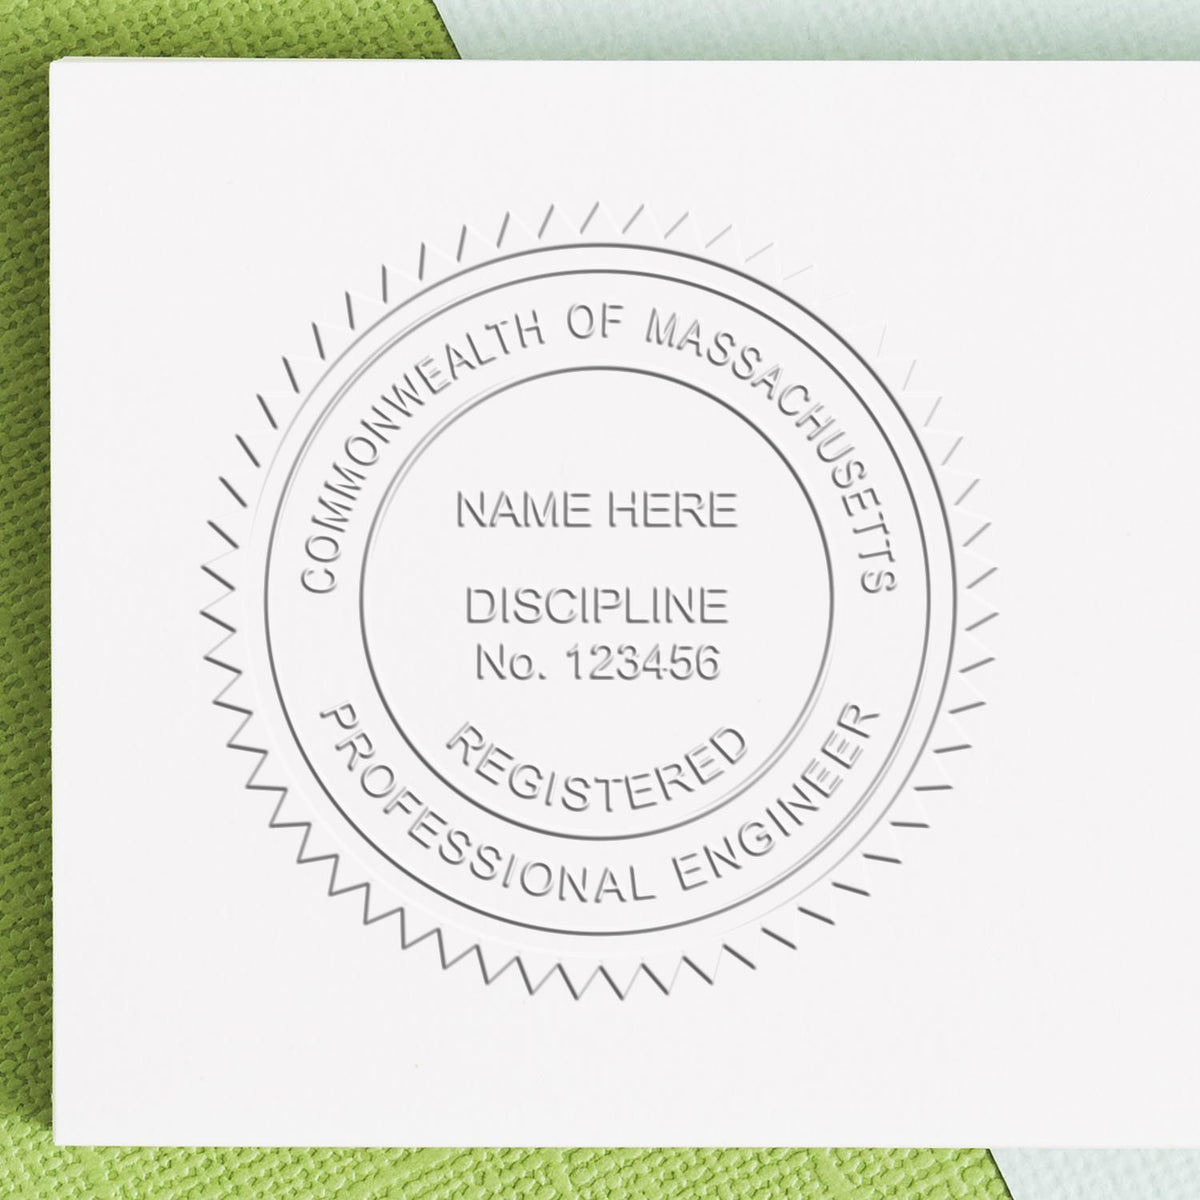 The Gift Massachusetts Engineer Seal stamp impression comes to life with a crisp, detailed image stamped on paper - showcasing true professional quality.